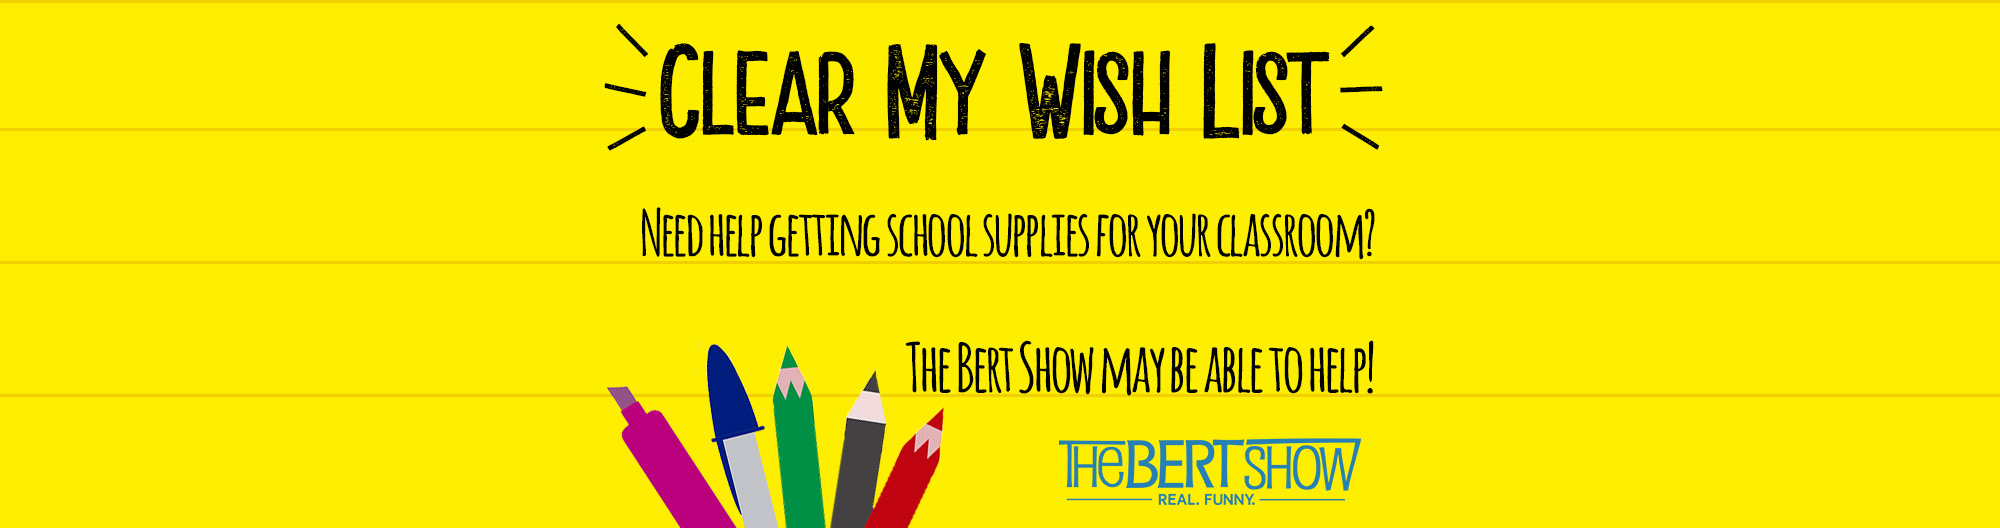 Teachers We Want To Help Clear Your Classroom Wish List! + Check Out